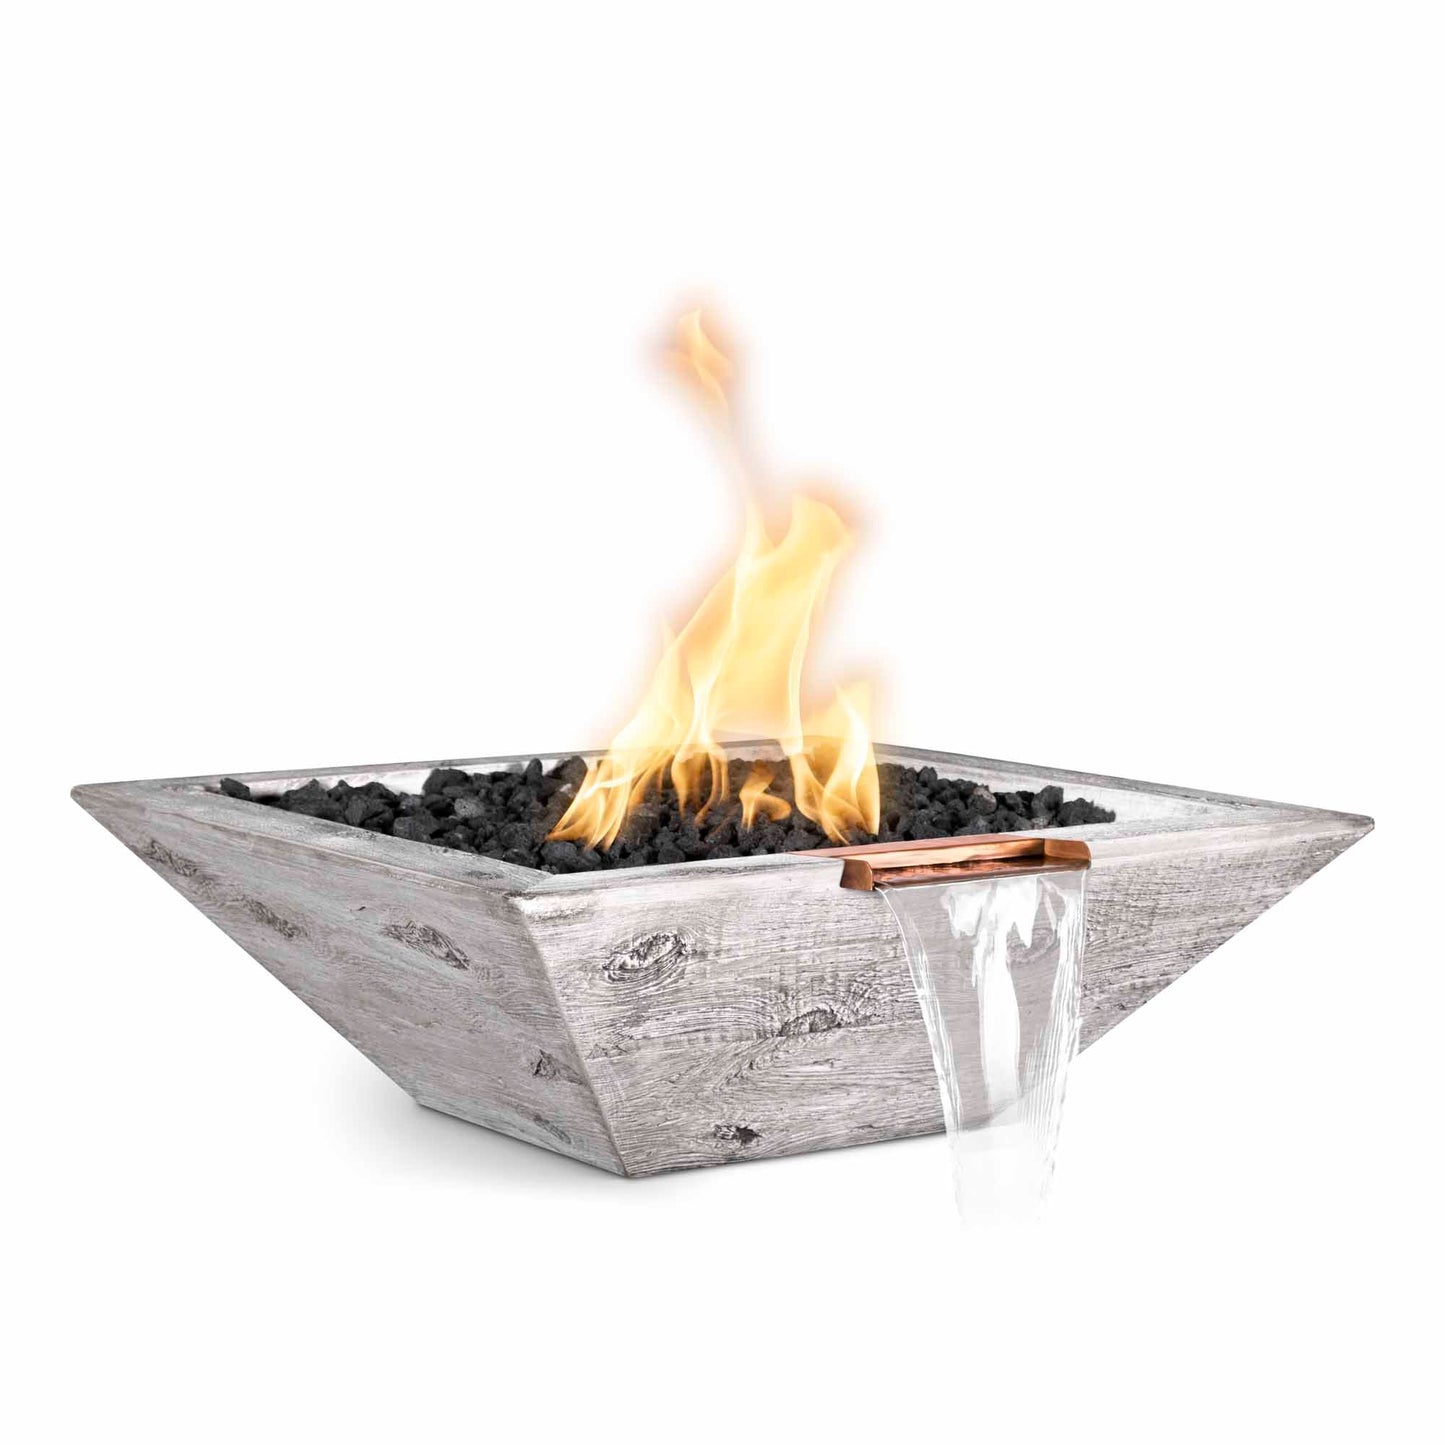 The Outdoor Plus Square Maya 30" Oak Wood Grain Liquid Propane Fire & Water Bowl with Match Lit with Flame Sense Ignition